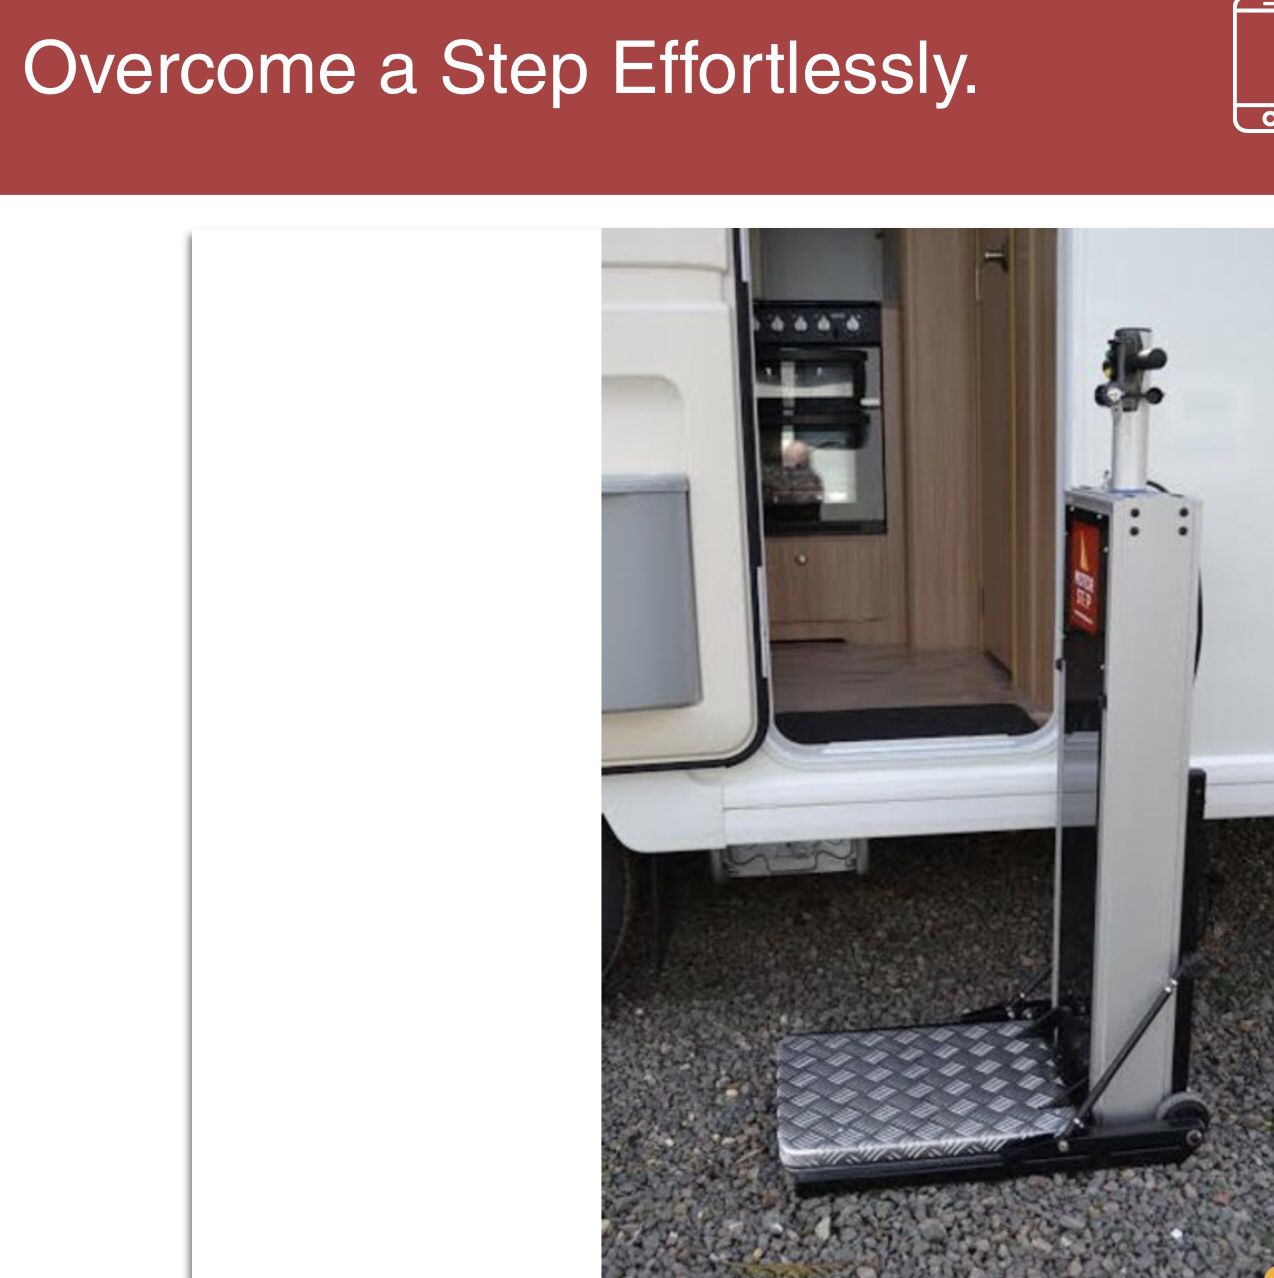 MOTORSTEP - LIFT FOR EASY ACCESS TO RV, MOTORHOME, TRAVEL TRAILER AND HOME